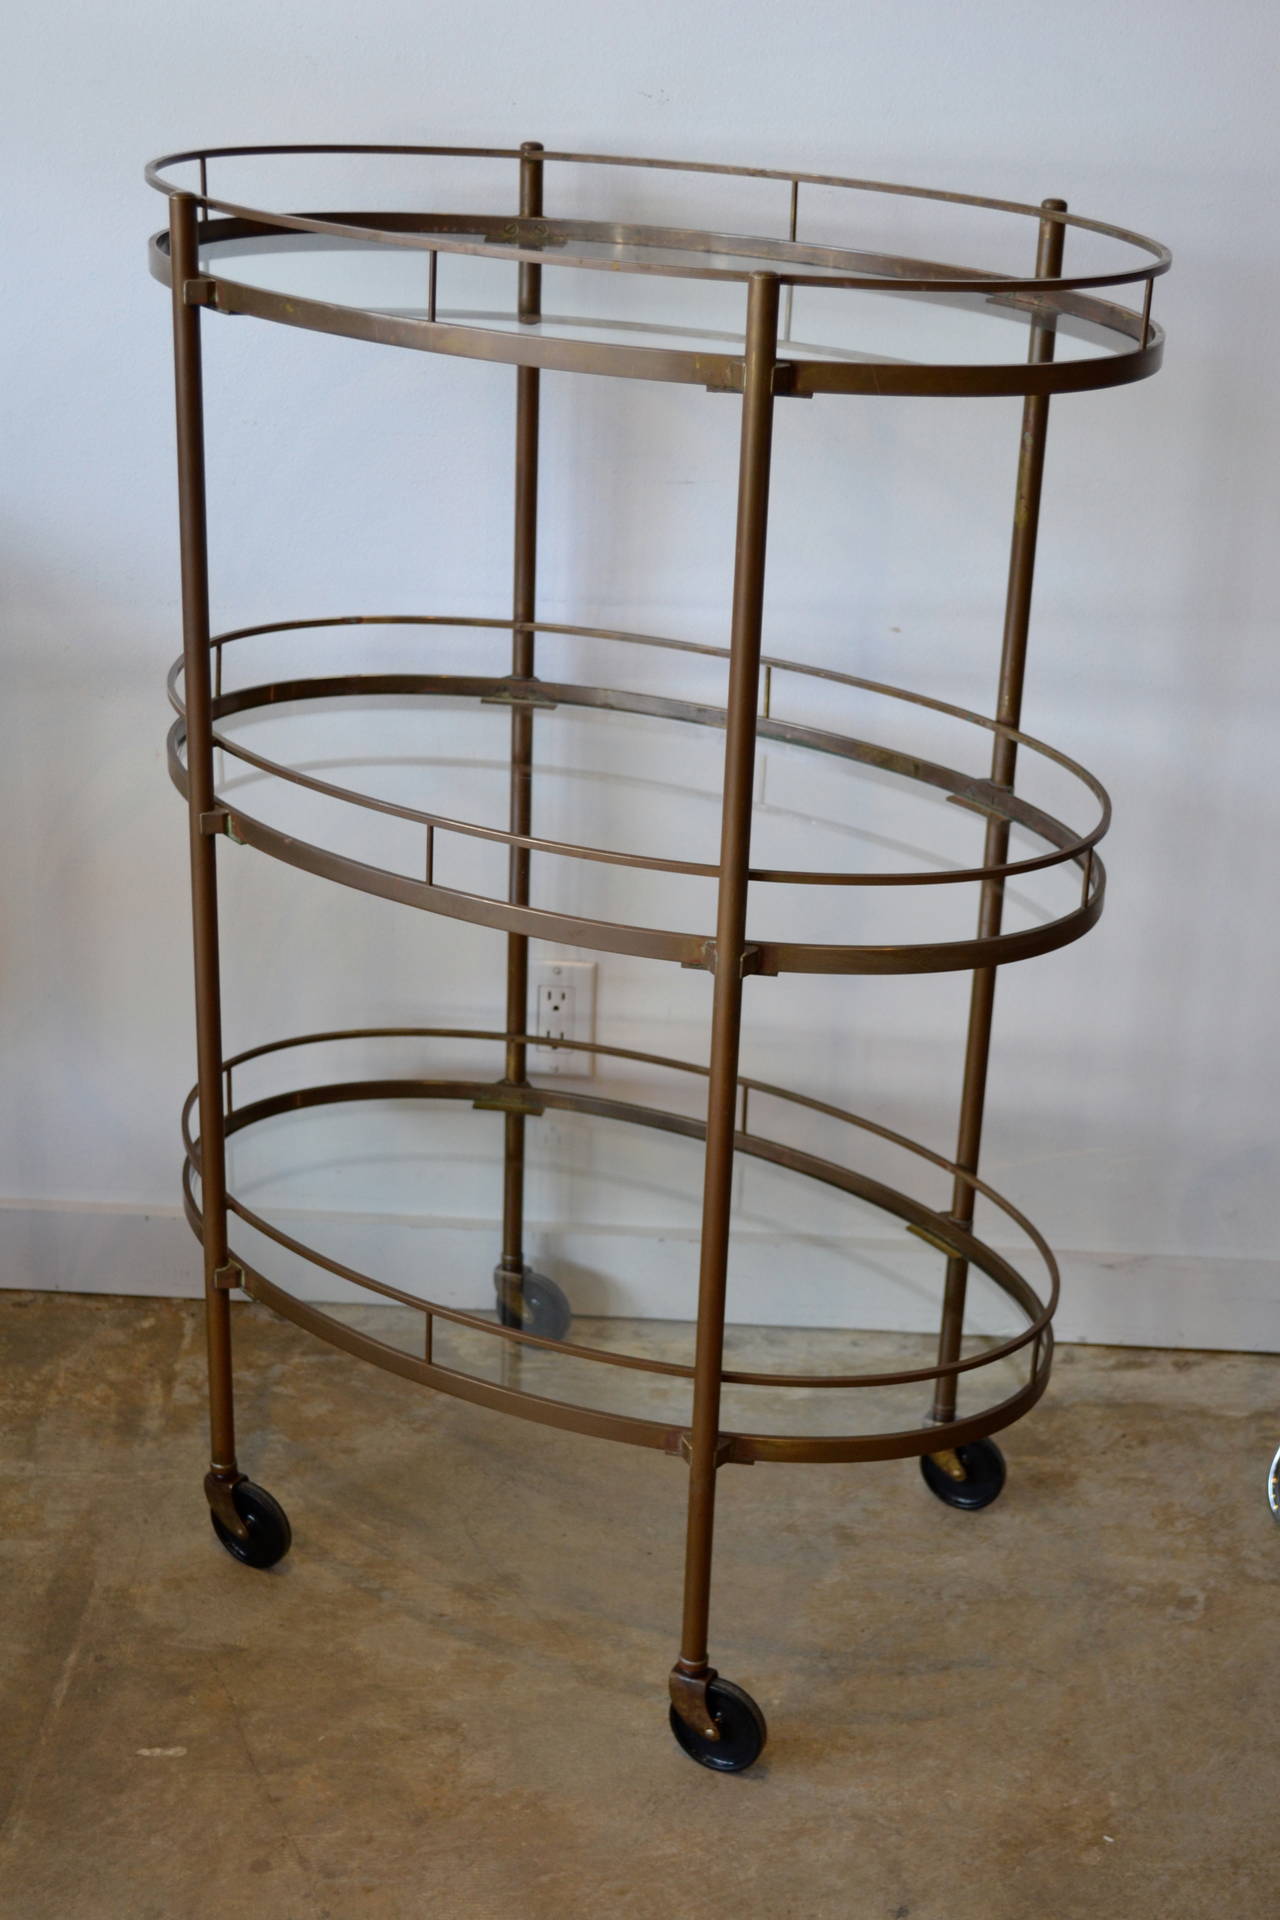 Exceptional three-tiered, Art Deco, solid brass serving cart with refined lines and original glass by Maxwell Phillip Co, 1930s. This cart is in excellent condition, all original with original patina. Can be shined to high polish if desired.